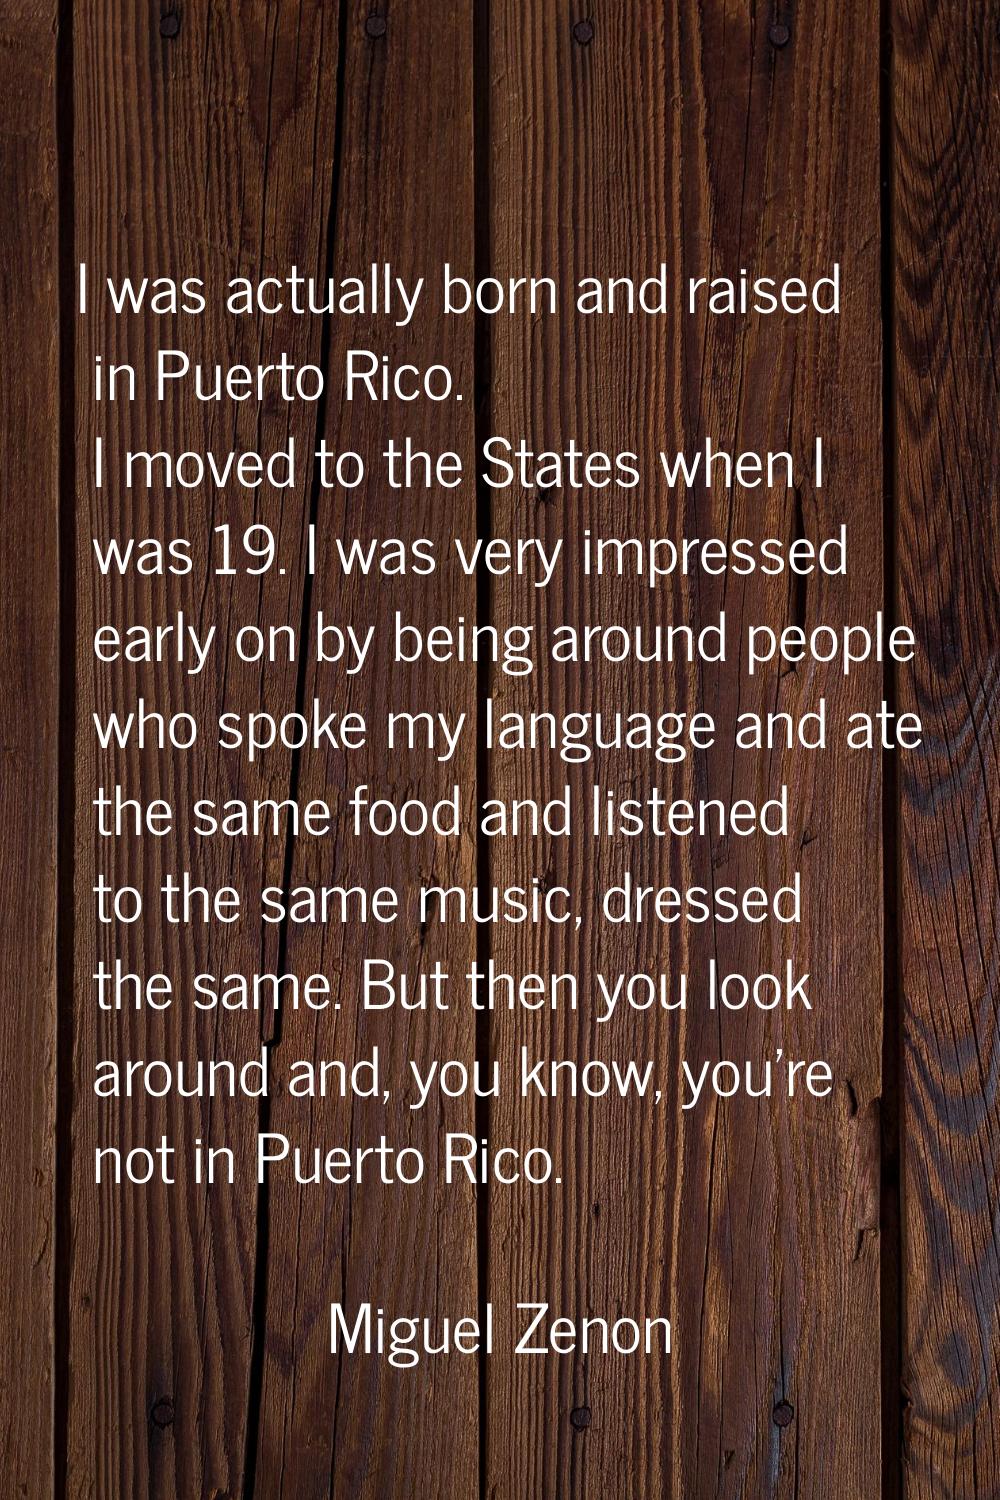 I was actually born and raised in Puerto Rico. I moved to the States when I was 19. I was very impr